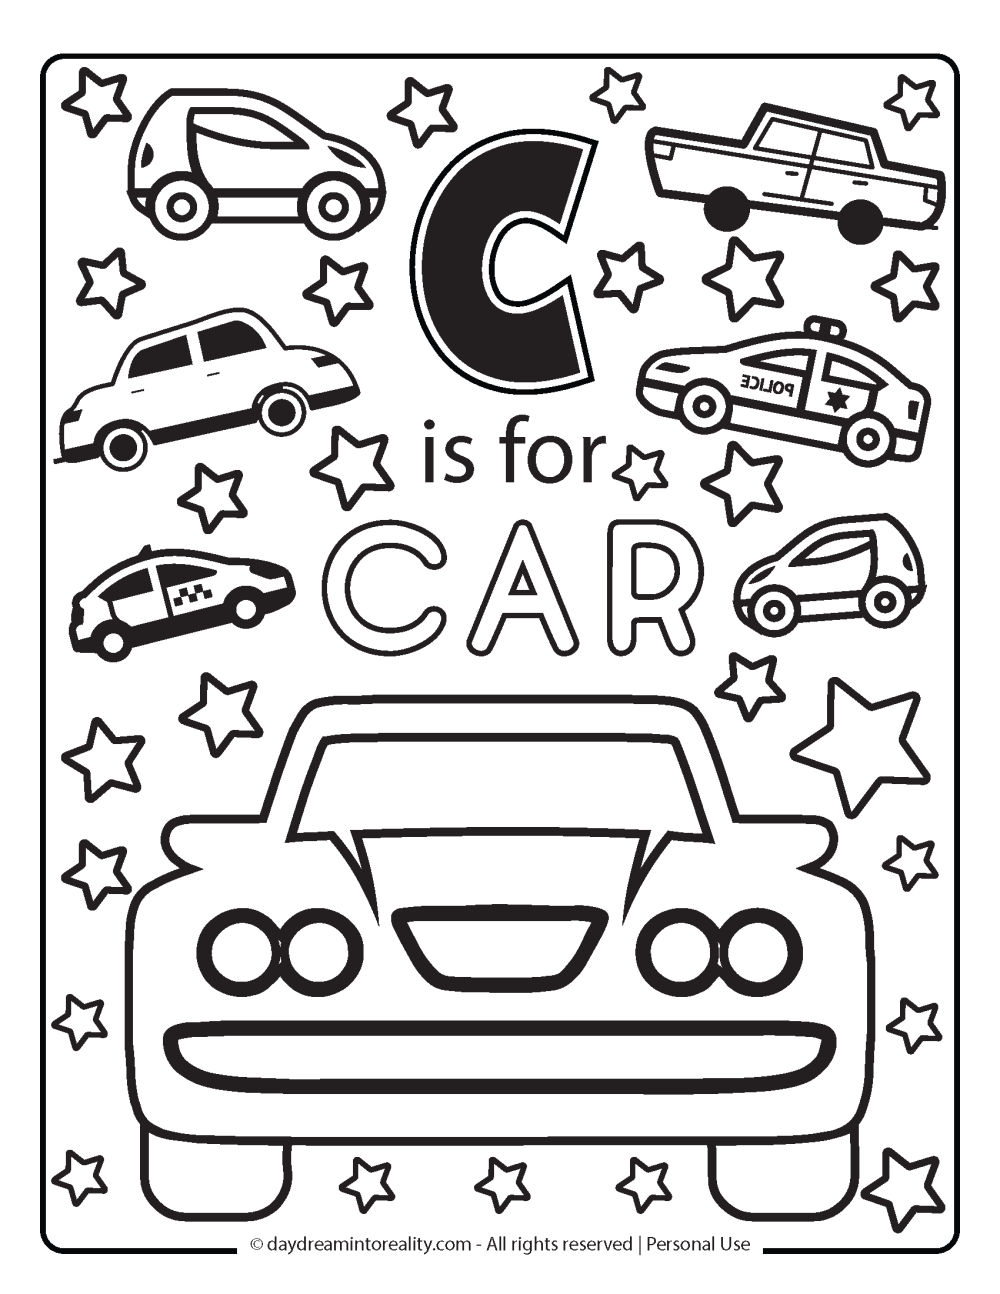 Letter C coloring page free printable - c is for car